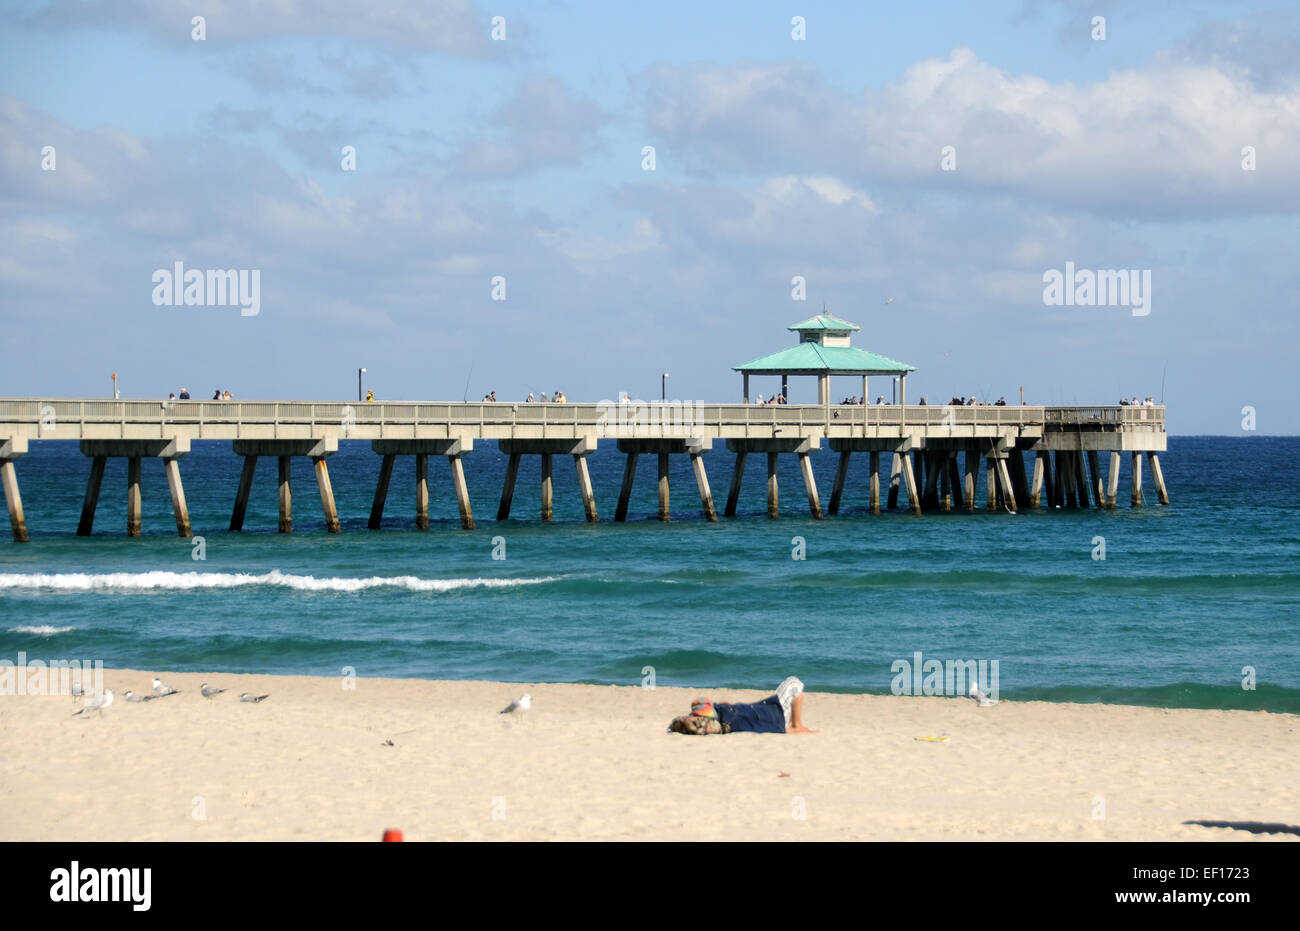 Pier with tourists on the South Florida coastline Stock Photo